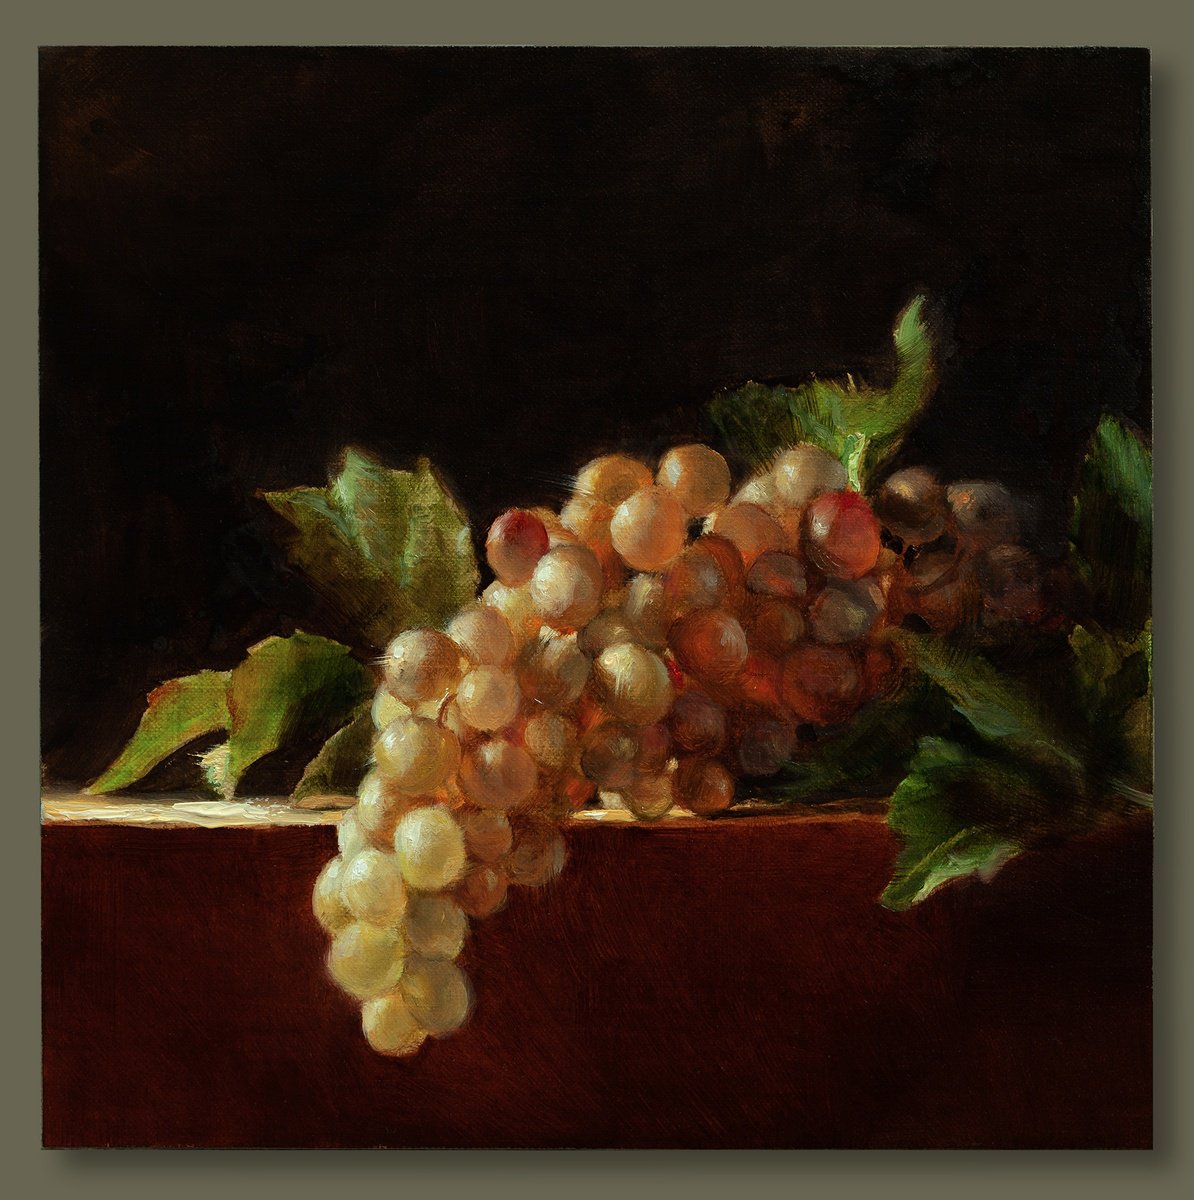 The Grape by Tom Off